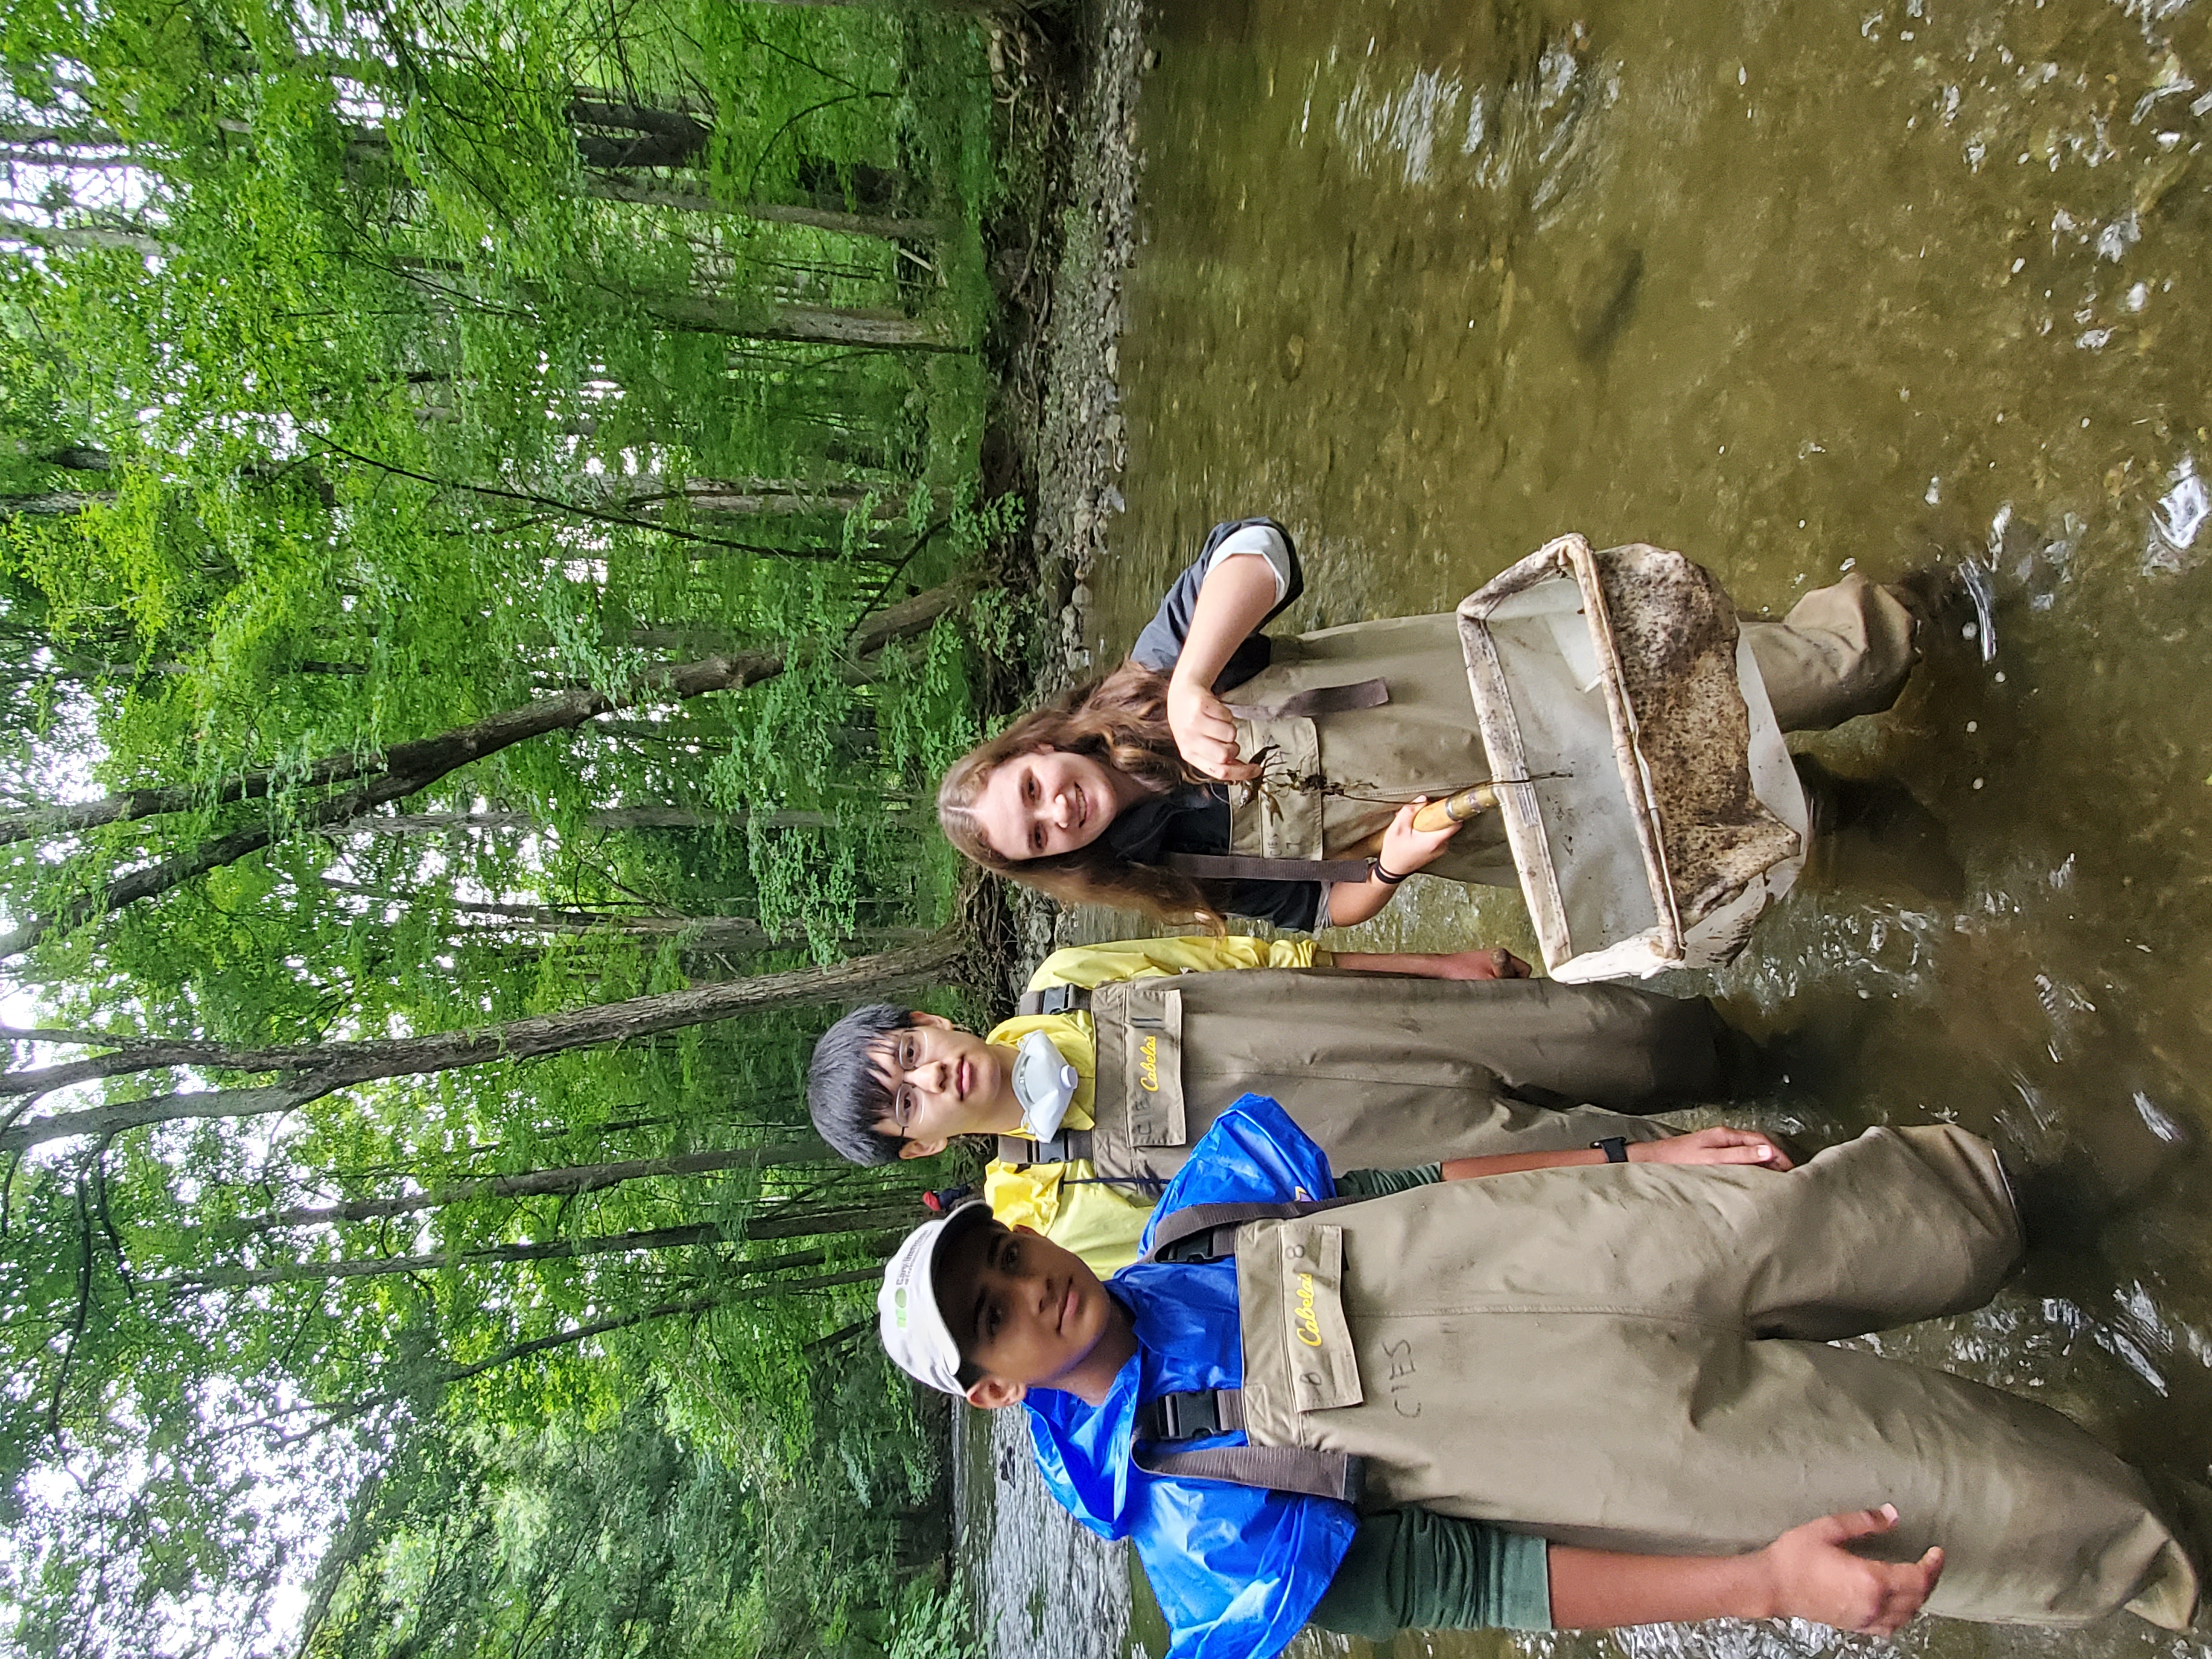 MH-YES students pose with a rather large crayfish they caught while sampling for macroinvertebrates in Wappinger Creek (Millbrook, NY). Photo credit: Kaila Hastings